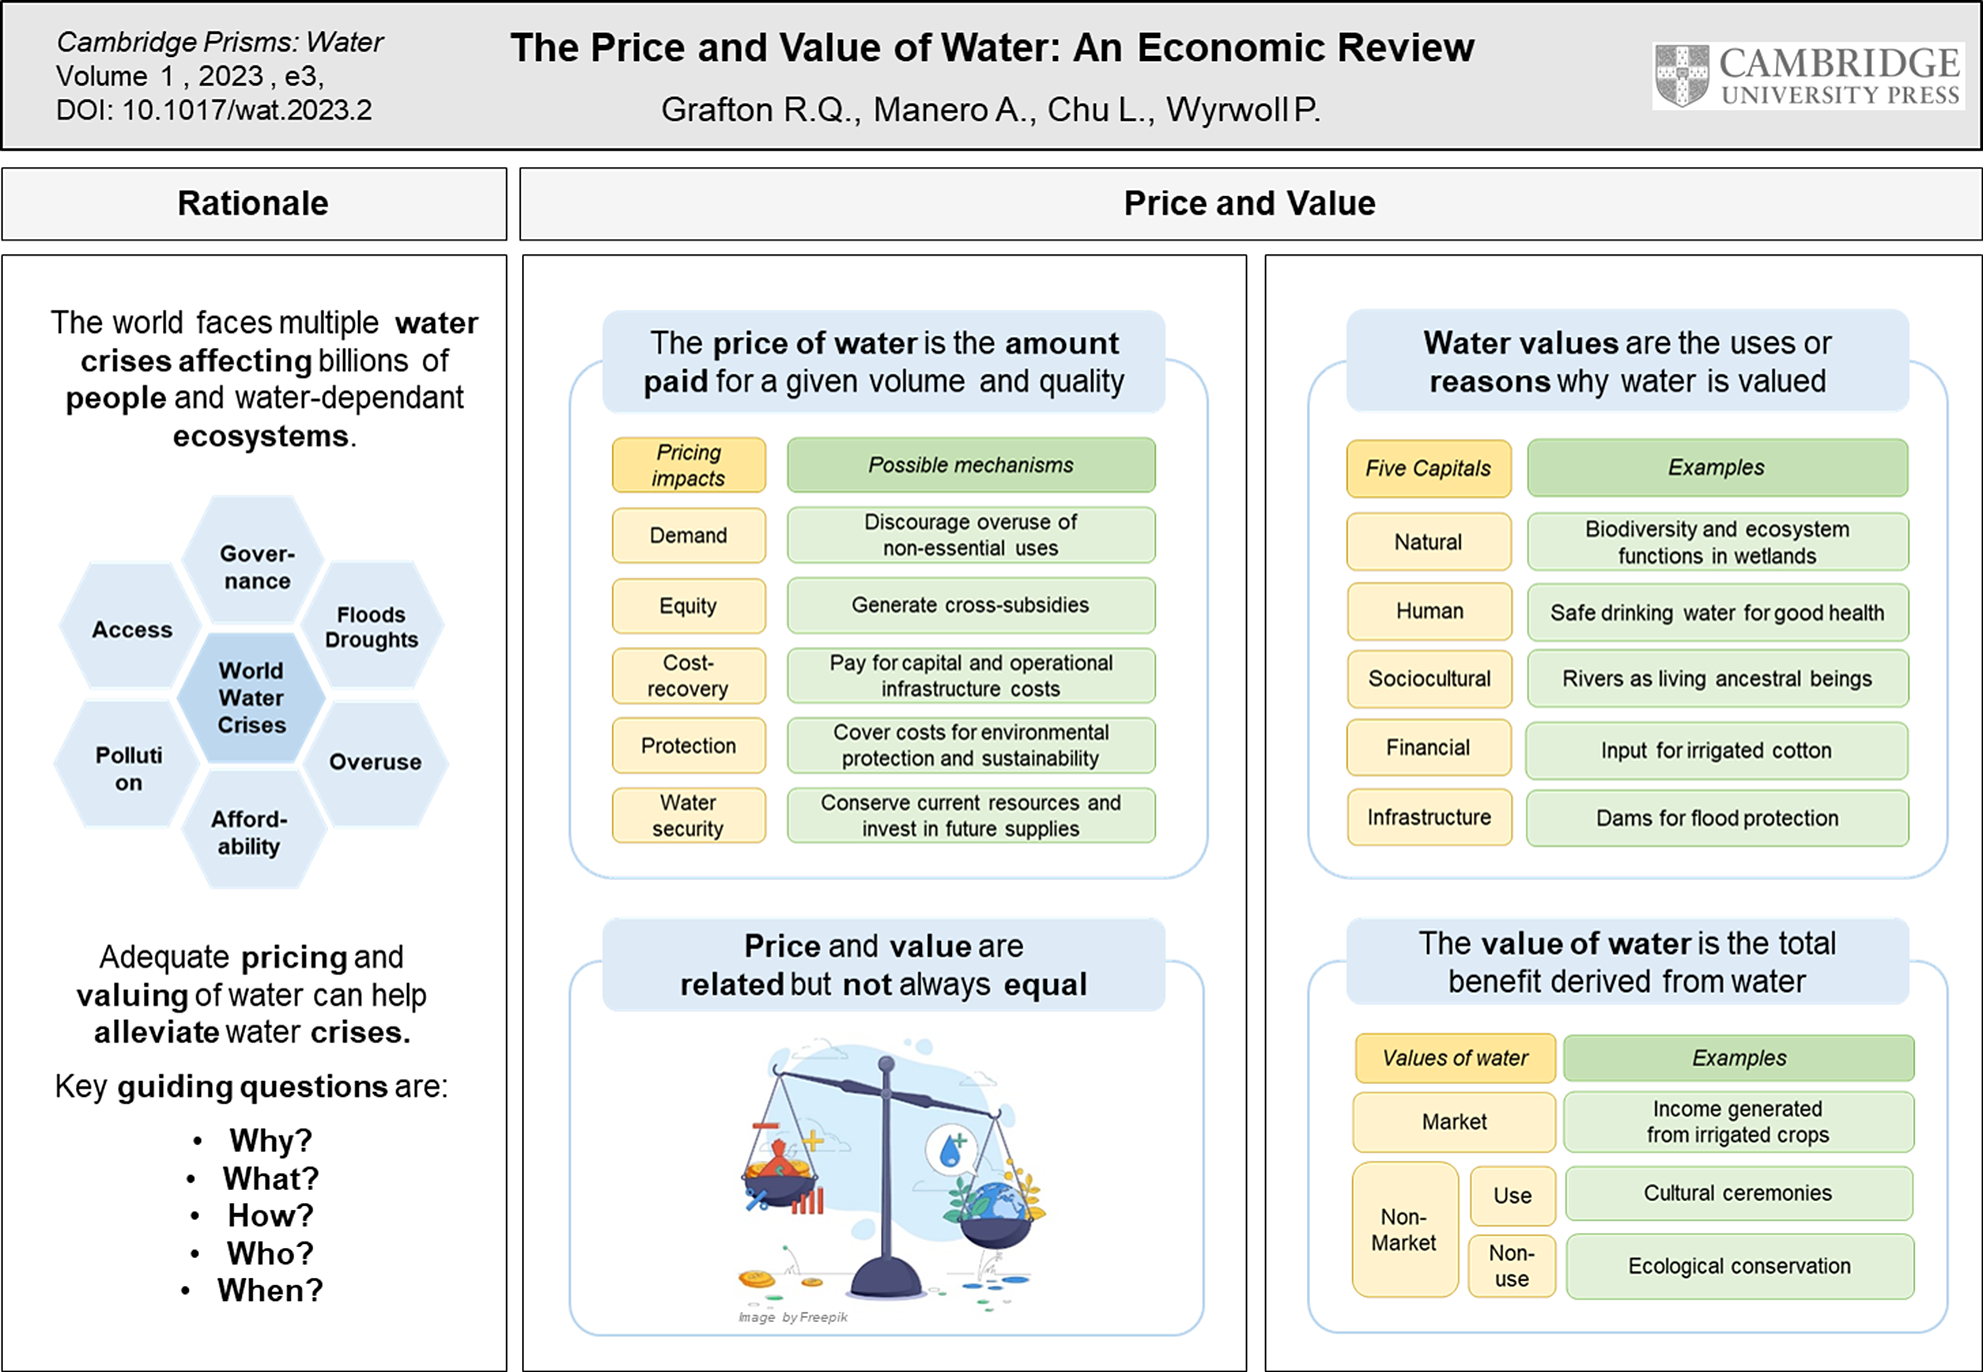 The price and value of water: An economic review, Cambridge Prisms: Water